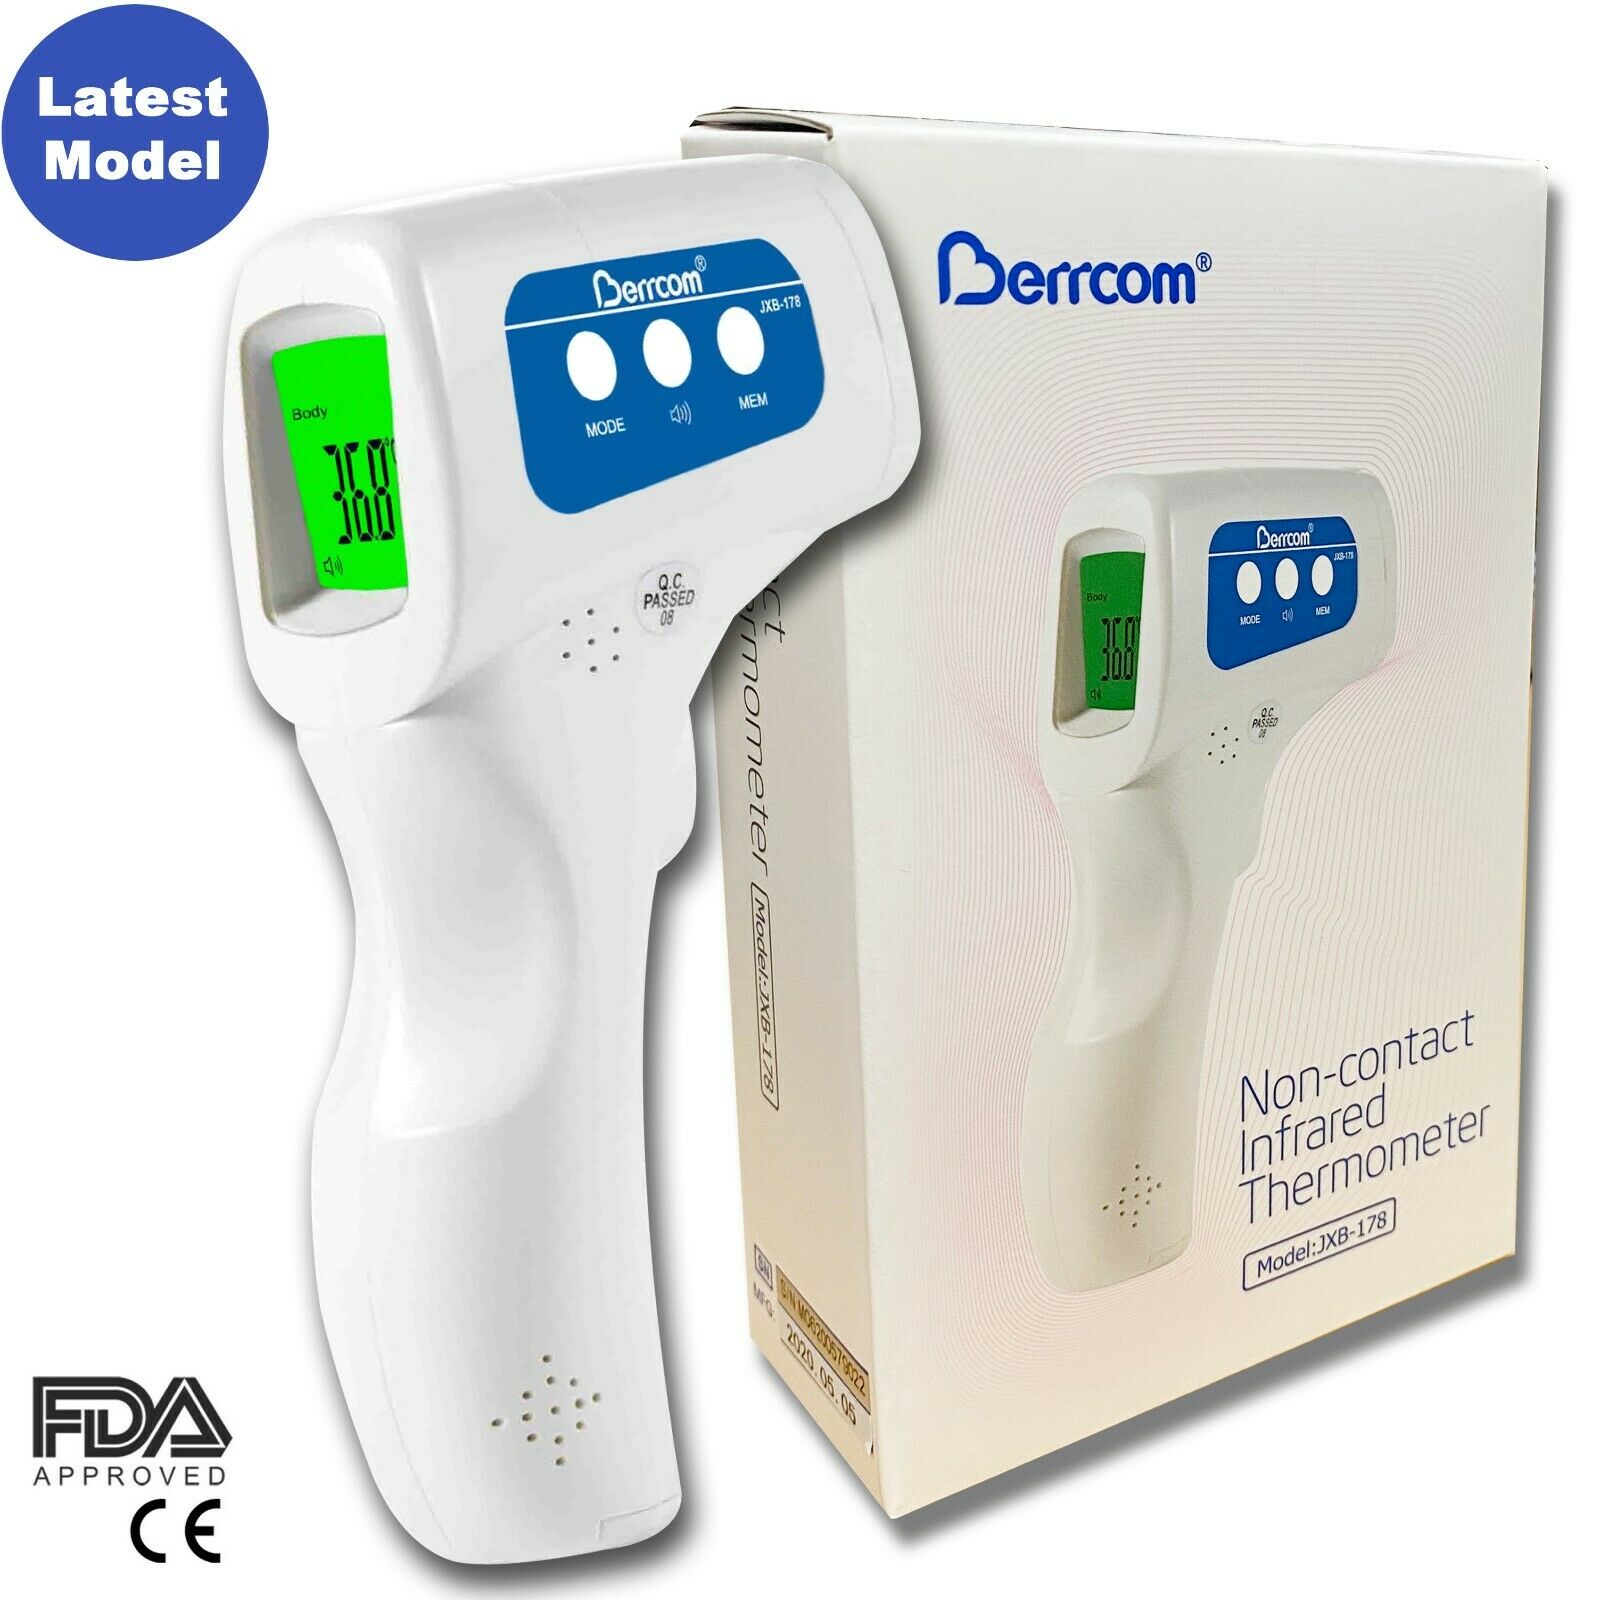 Berrcom Medical Grade Non-contact Infrared Forehead Thermometer (fda Approved)